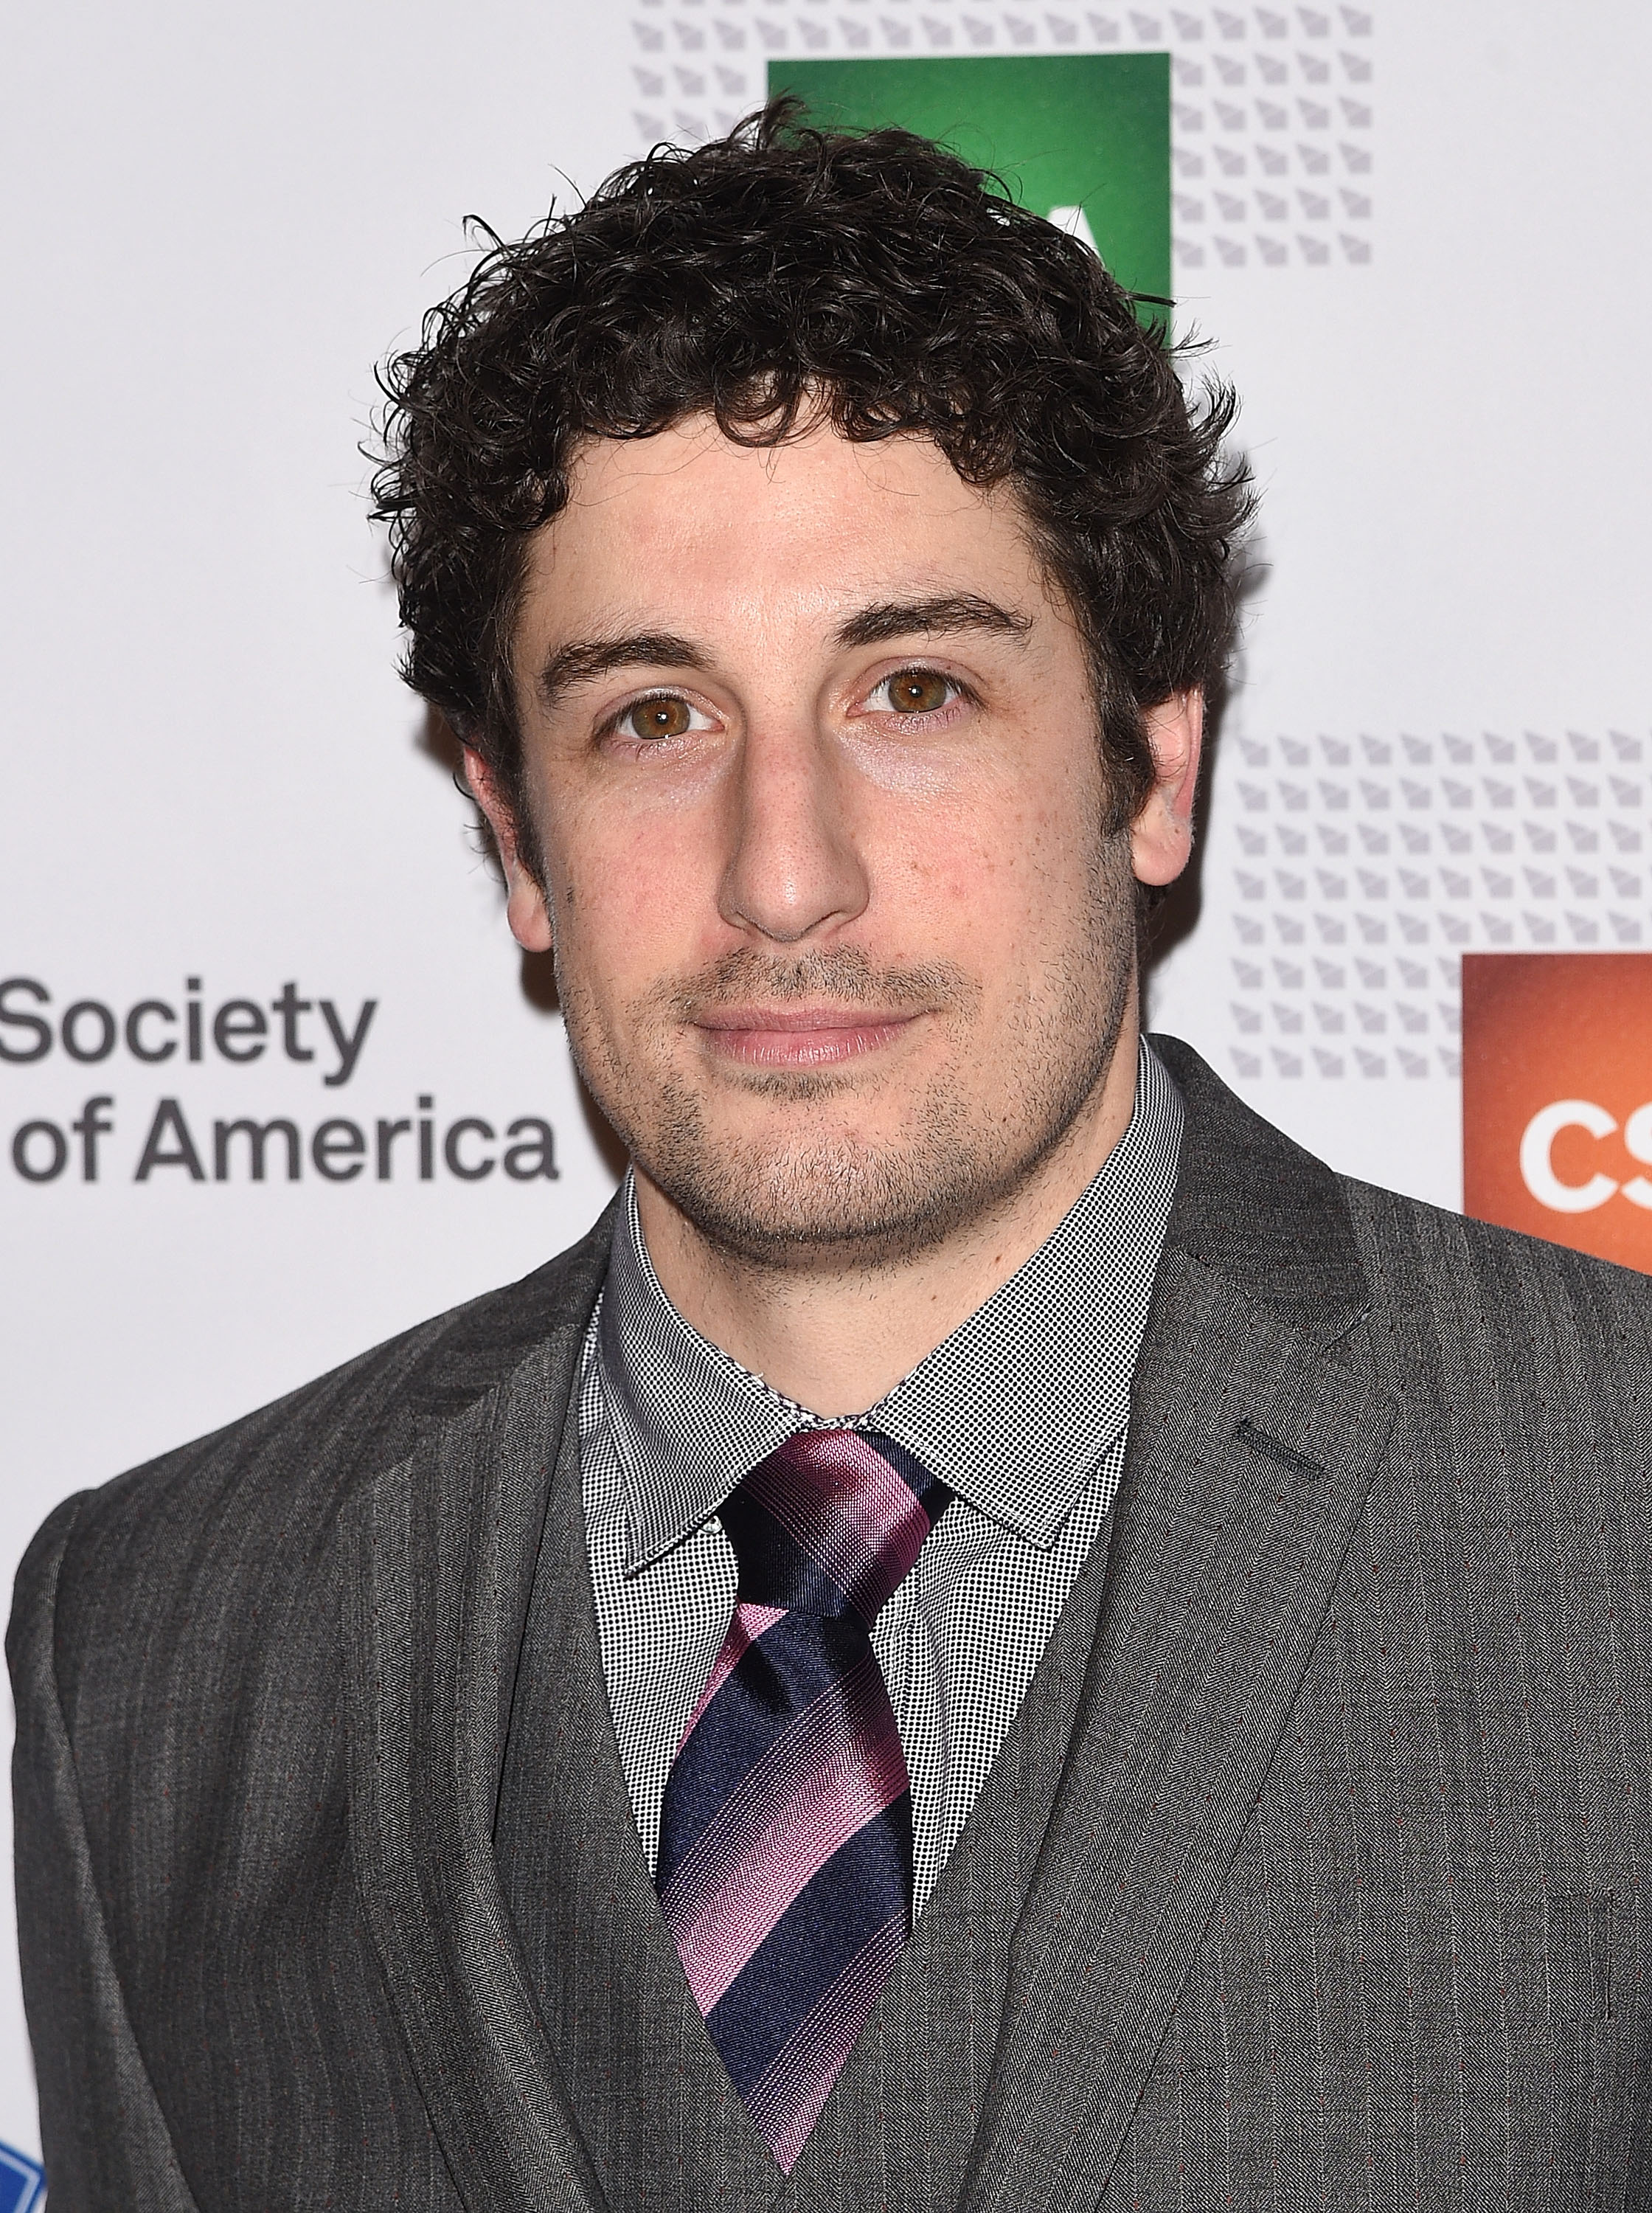 Actor Jason Biggs attends the 30th Annual Artios Awards in New York City on Jan. 22, 2015.